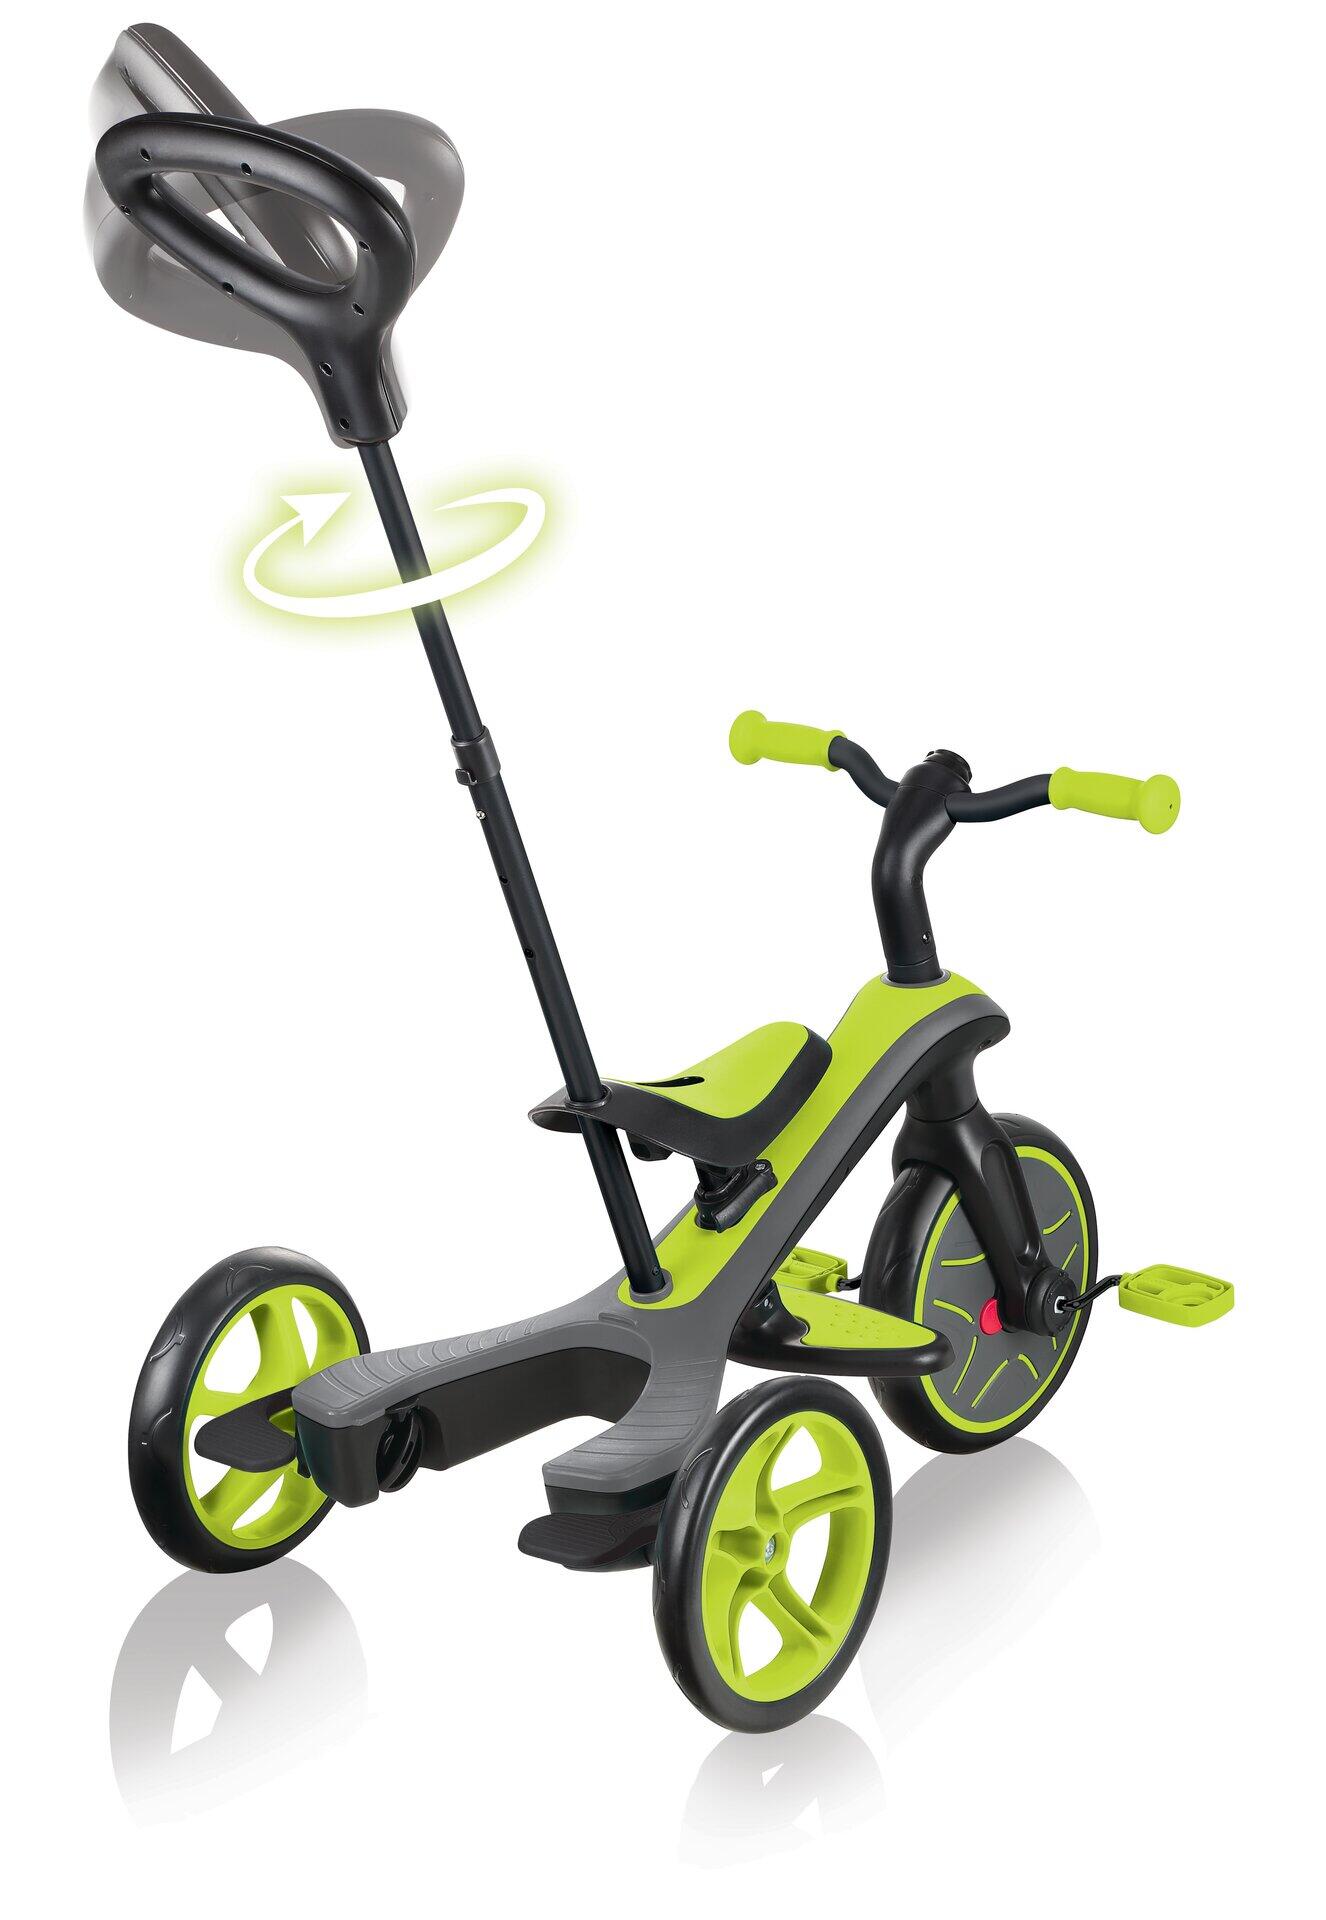 Globber Explorer Trike 4 in 1 with Parent Handle - Lime Green 7/7